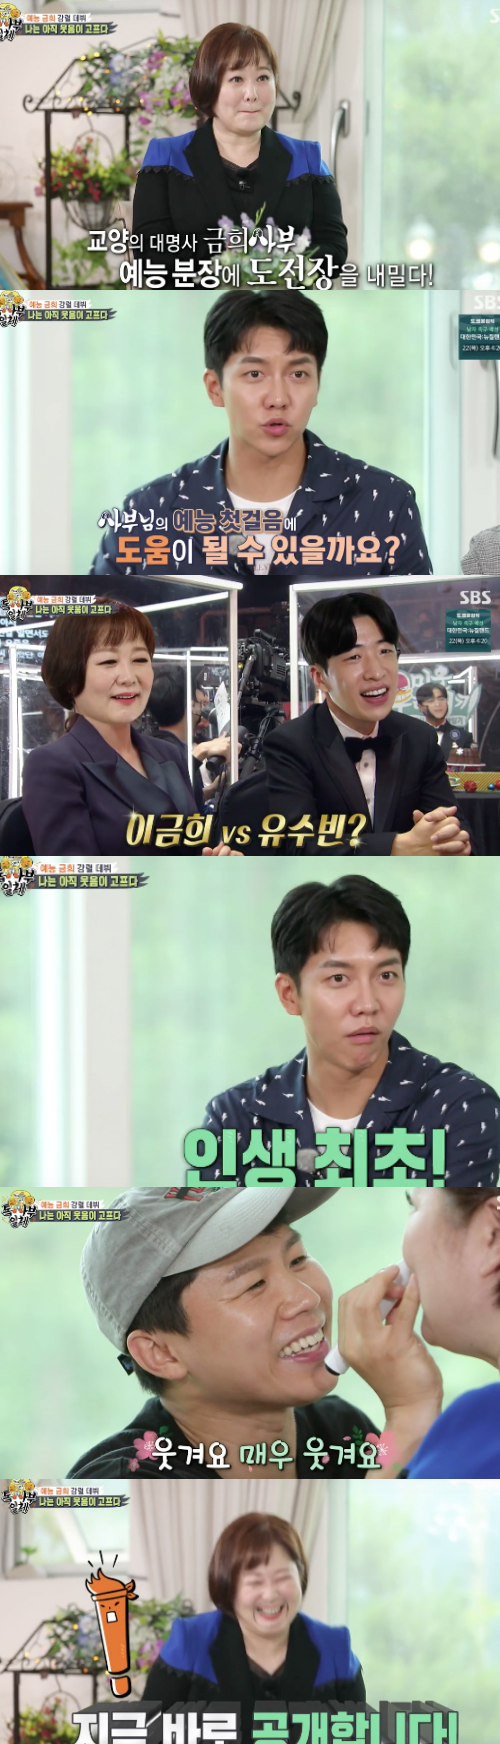 In All The Butlers, Lee Geum-hee showed a rivalry with Yoo Soo-bin, and the salary Movie - The Negotiation, which mentioned the abolition of All The Butlers, laughed.Master Lee Geum-hee appeared on SBS entertainment All The Butlers, which aired on the 18th.First, the production team said, Today, the master is the god of conversation, and that he will announce all the techniques of conversation and inform the whole of Toxabu.Lee Geum-hee, who was the 33rd year of his debut this year, introduced his master and said, I feel like I have read about that much of a book when I meet 234,000 guests.Lee Geum-hee continued to show the outsiders lonely rap to appeal to the new charm. Everyone cheered Lee Geum-hee, who turned into MC Bamtoll, saying, What is the pronunciation, a diction that feels 33 years of inner life.When Lee Geum-hee exploded with Entertainment newborn first day, Kim Dong-Hyun said, How did you endure this meal over 30? Lee Seung-gi was surprised that he was a real first time.On the first day of entertainment, Yoo Soo-bin, a senior, said, I am Yoo Soo-binjino.Yoo Soo-bin said, I will play with vocality. When I showed a relaxed stage manners, everyone was impressed that they were complete rappers, too good.I decided to pass on how to speak well in earnest.Lee said, I do not know the way I am because I do not plan to travel because I have the same life, travel, and life.Such unexpected things sometimes become special memories.It depends on how you accept the same situation, and even if you walk the unexpected path, enjoy it, Lee said.Lee Geum-hee, who mentioned that the wrong train will take you to your destination, said, I have a master who taught me life, so I think about success and failure differently.Lee continued to interview as an interviewer, and Yoo Soo-bin and Kim Dong-Hyun talked about Top Model, and Yoo Soo-bin talked about liquidation, but rather wanted to select Kim Dong-Hyun.Because he told his story. Specific self-experience was a plus factor.Lee said, I want to broadcast it until the age of 90 like Songhae. He said, The world should go forward, but the world is not entertainment, and the entertainment Rookie award is a dream in 2021, as it has been steadily cultivated for 33 years.Lee Seung-gi said, There is also a suvin, and he cheered Lee Geum-hee, saying, I want to help you with the first step of entertainment, while catching a rivalry with Yoo Soo-bin.At this time, Lee Seung-gi said, I want to make up. He exploded his passion and decided to put everything down coolly for entertainment.When everyone applauded her passion, Lee said, I do not think I can laugh at me, but when I laugh at my words, I have a happiness. I want to laugh and learn.Above all, Lee Seung-gi asked about how to talk about money, and Lee Geum-hee said, It is hard to say to me, but there are cases where I have to do the salary - The Negotiation. He decided to practice if necessary, and pretend to be a real salary.Lee Seung-gi first mentioned that Yoo Soo-bin is a new member, and Yoo Soo-bin said, I have not heard about the payment yet, and Lee Seung-gi also said, The four-year freeze is severe. He threw them and embarrassed them and gave them a big smile.Capture All The Butlers Broadcast Screen